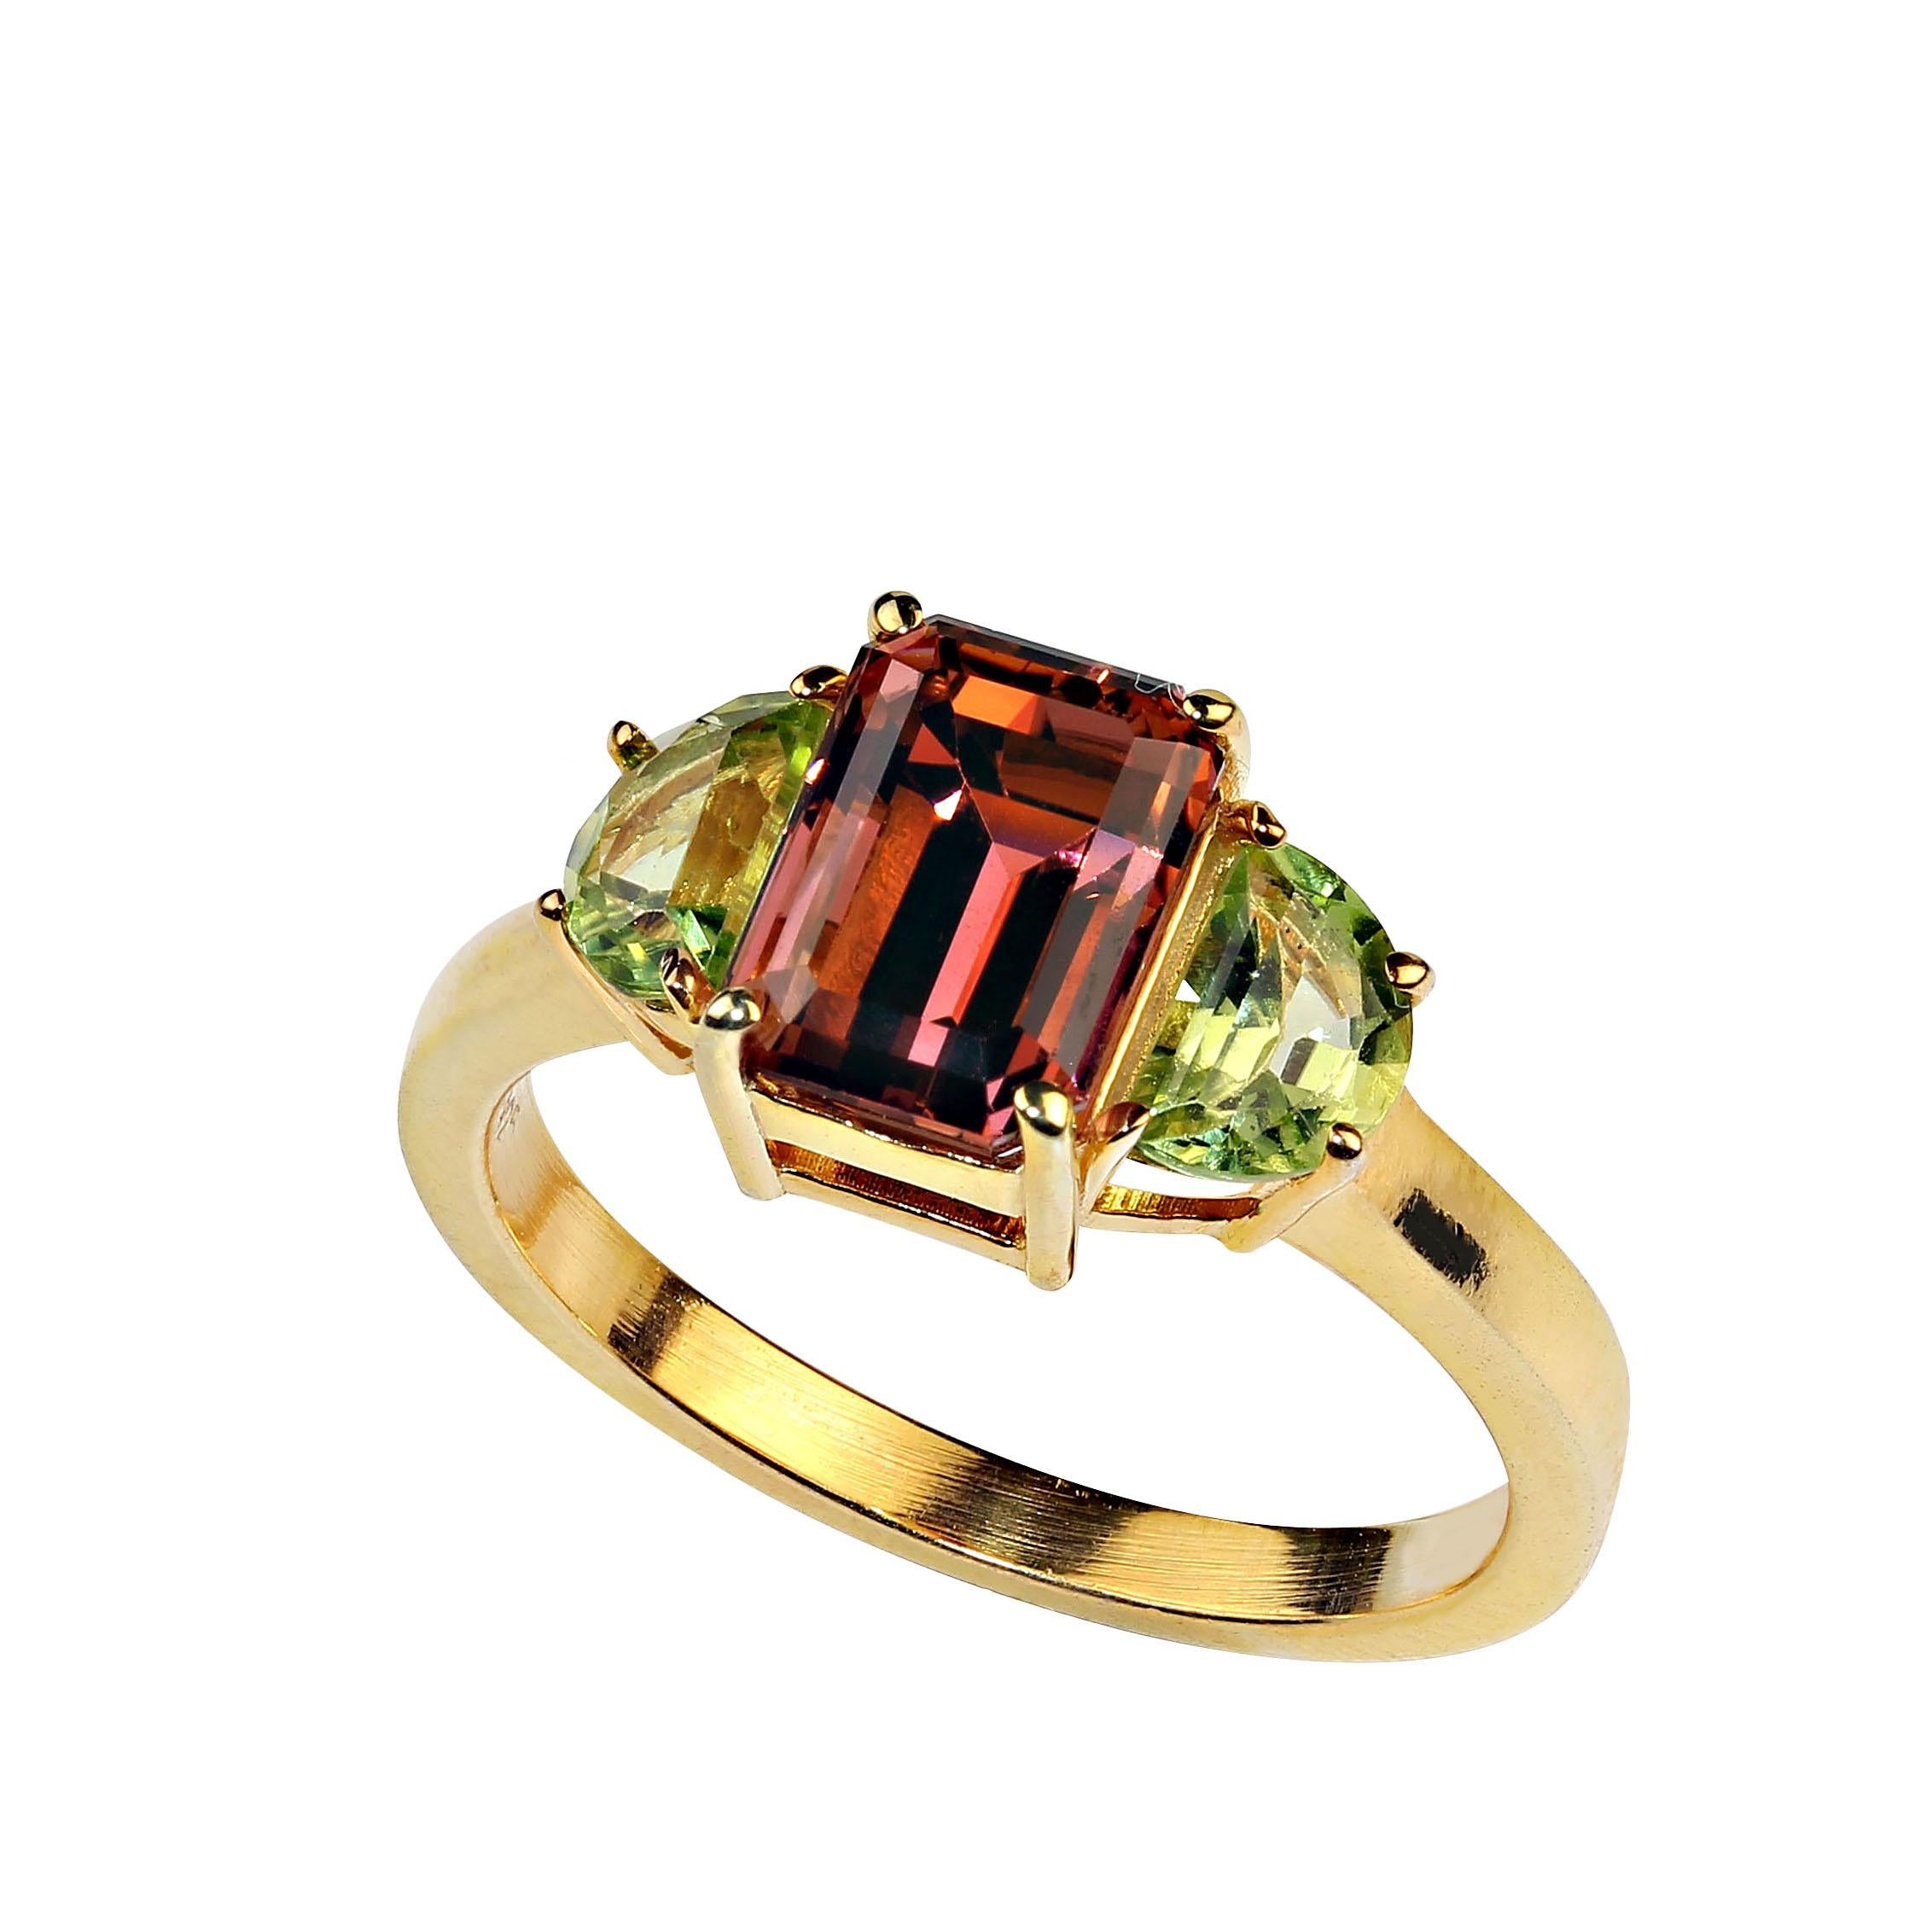 Artisan AJD Rare and Unusual Orange Tourmaline accented with Peridot Ring For Sale